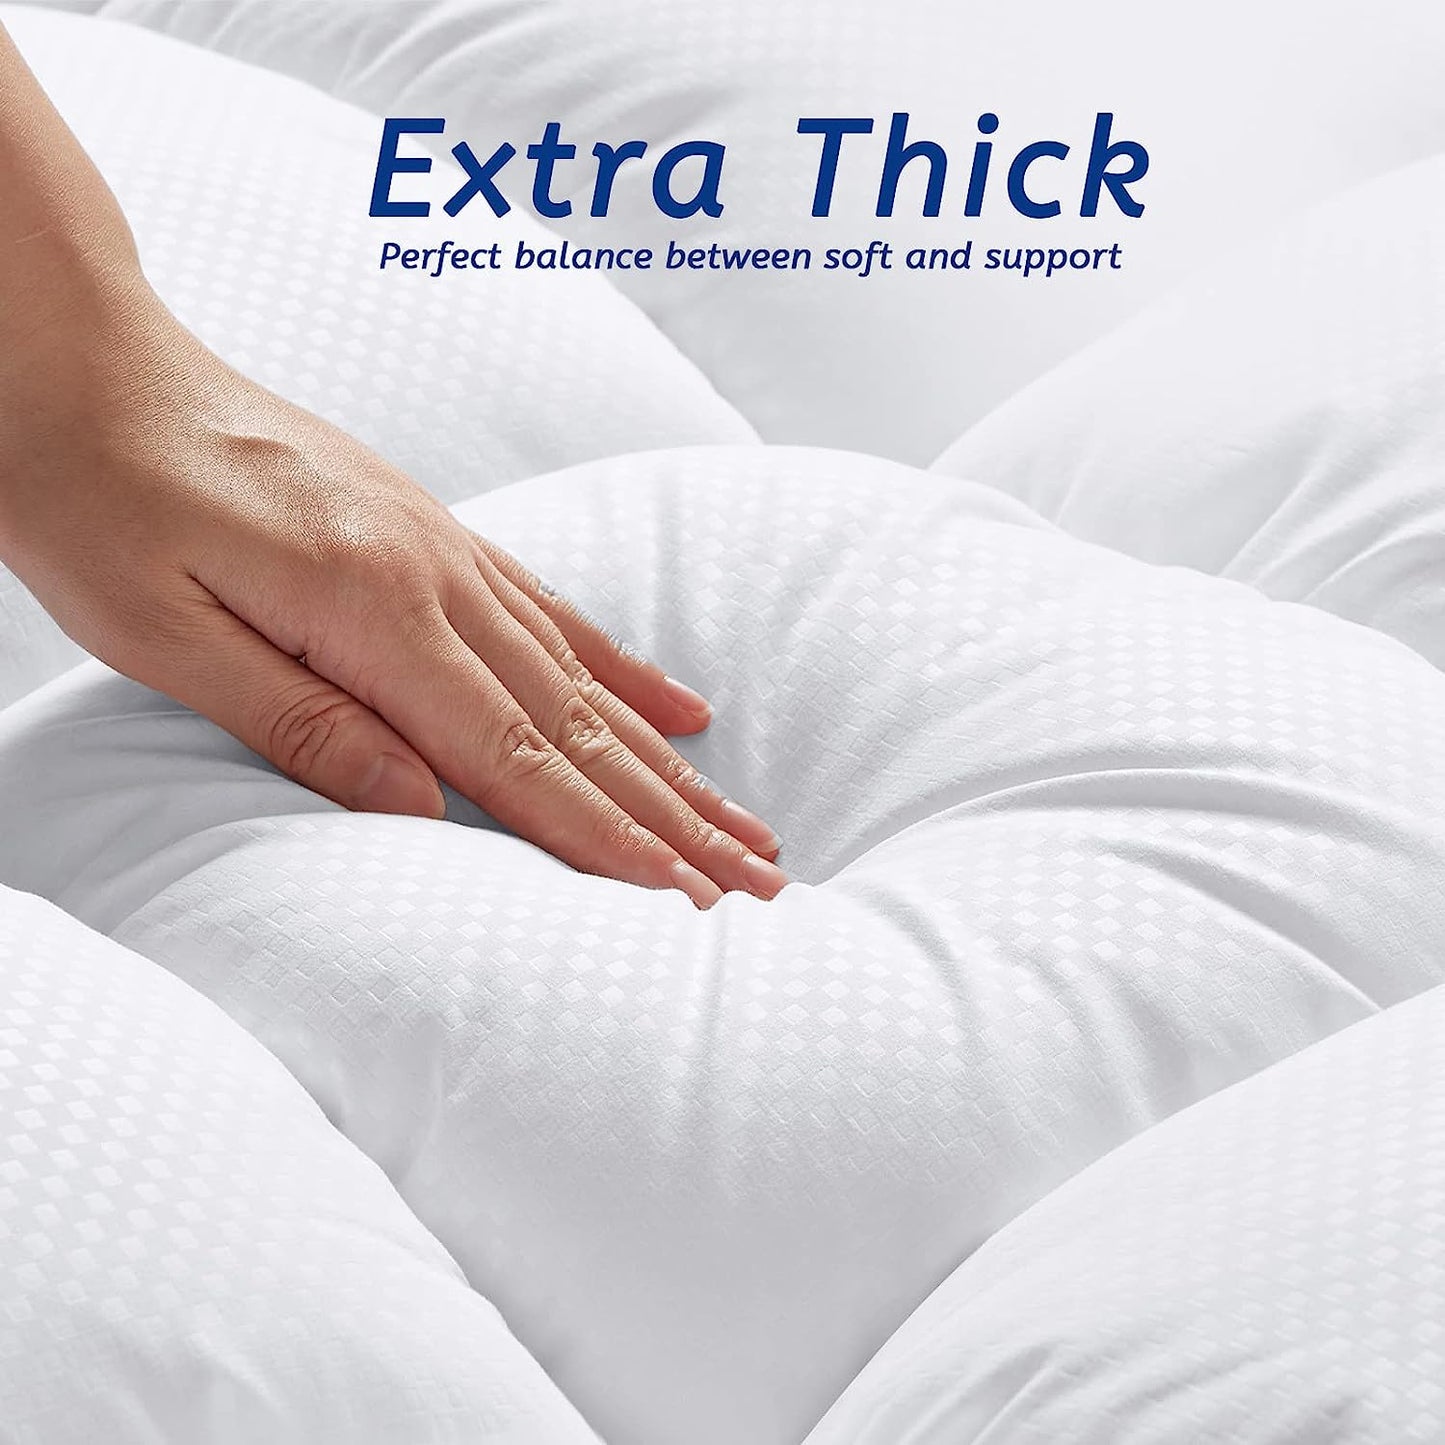 King Size Mattress Topper for Back Pain, Cooling Extra Thick Mattress Pad Cover with 8-21 inch Deep Pocket, Plush Pillow Top Mattress Topper Overfilled with Down Alternative, King Size, White (King, Wh